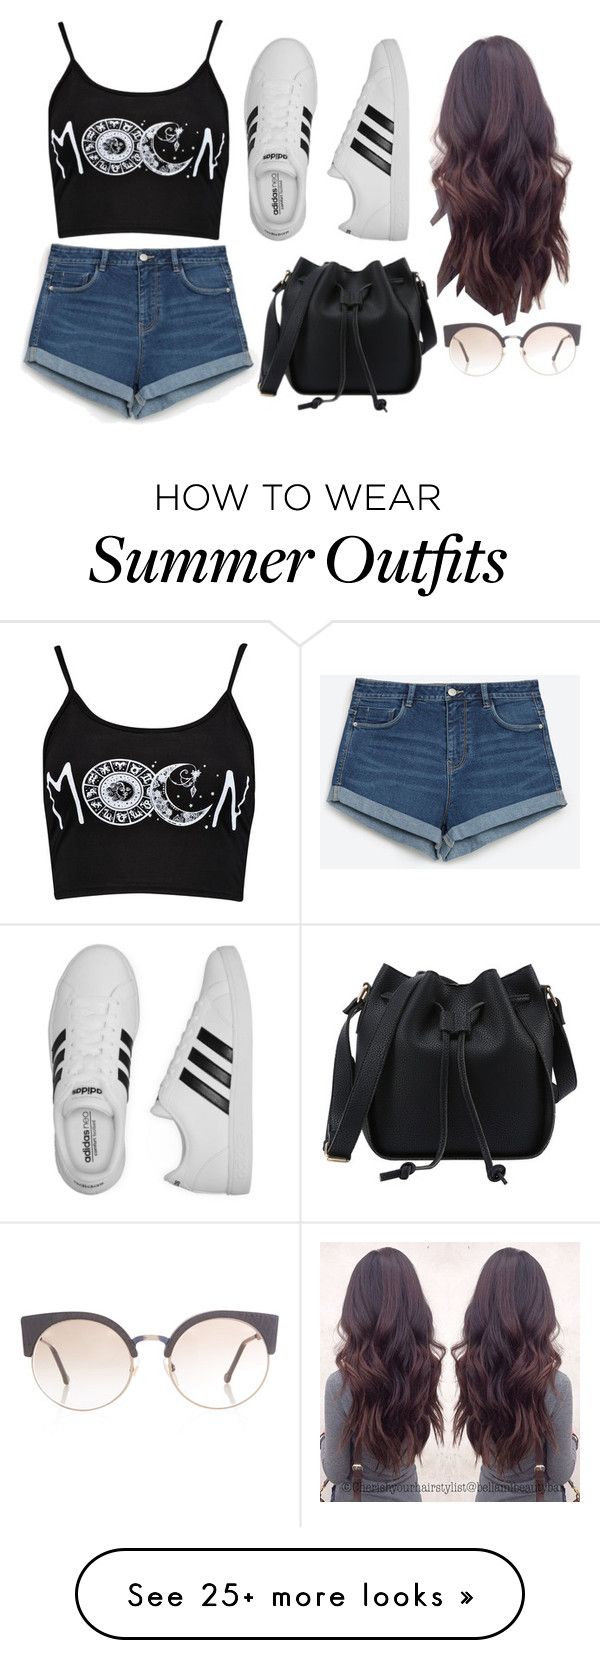 "Outfit 52" by decemberbaby19 on Polyvore featuring Boohoo, Zara, adid...